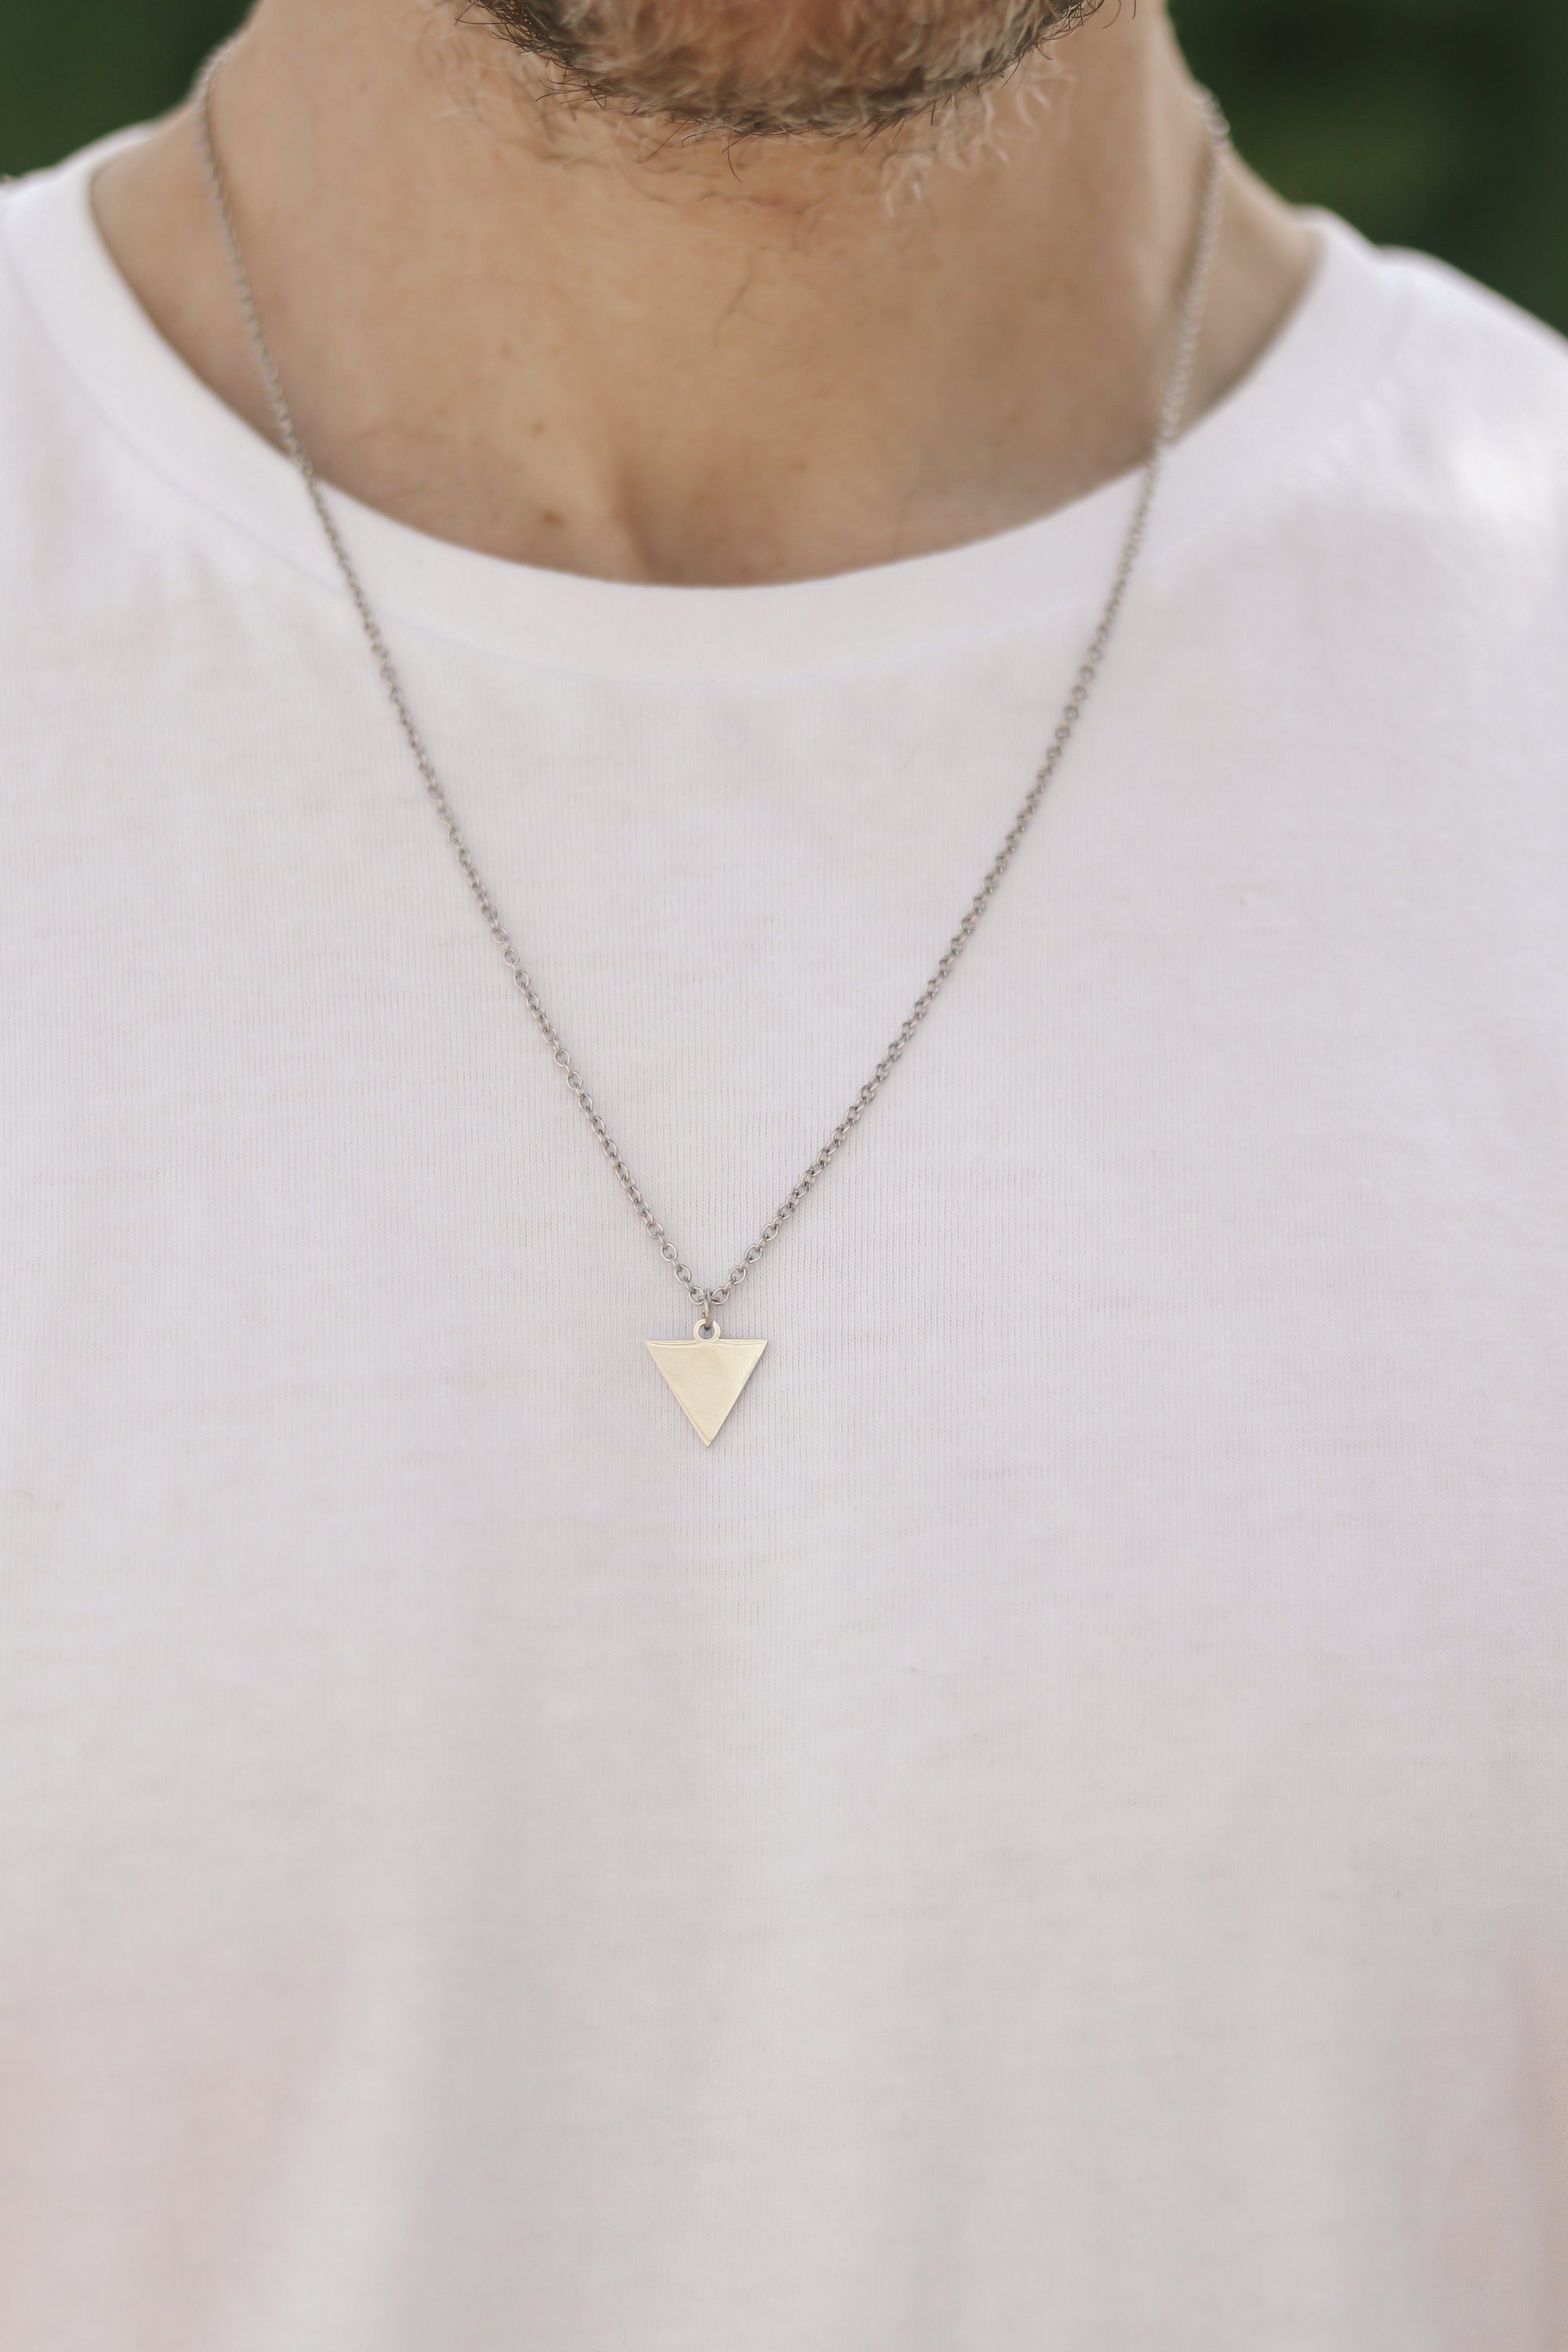 Triangle necklace for men, groomsmen gift, men's necklace with a gold –  Shani & Adi Jewelry